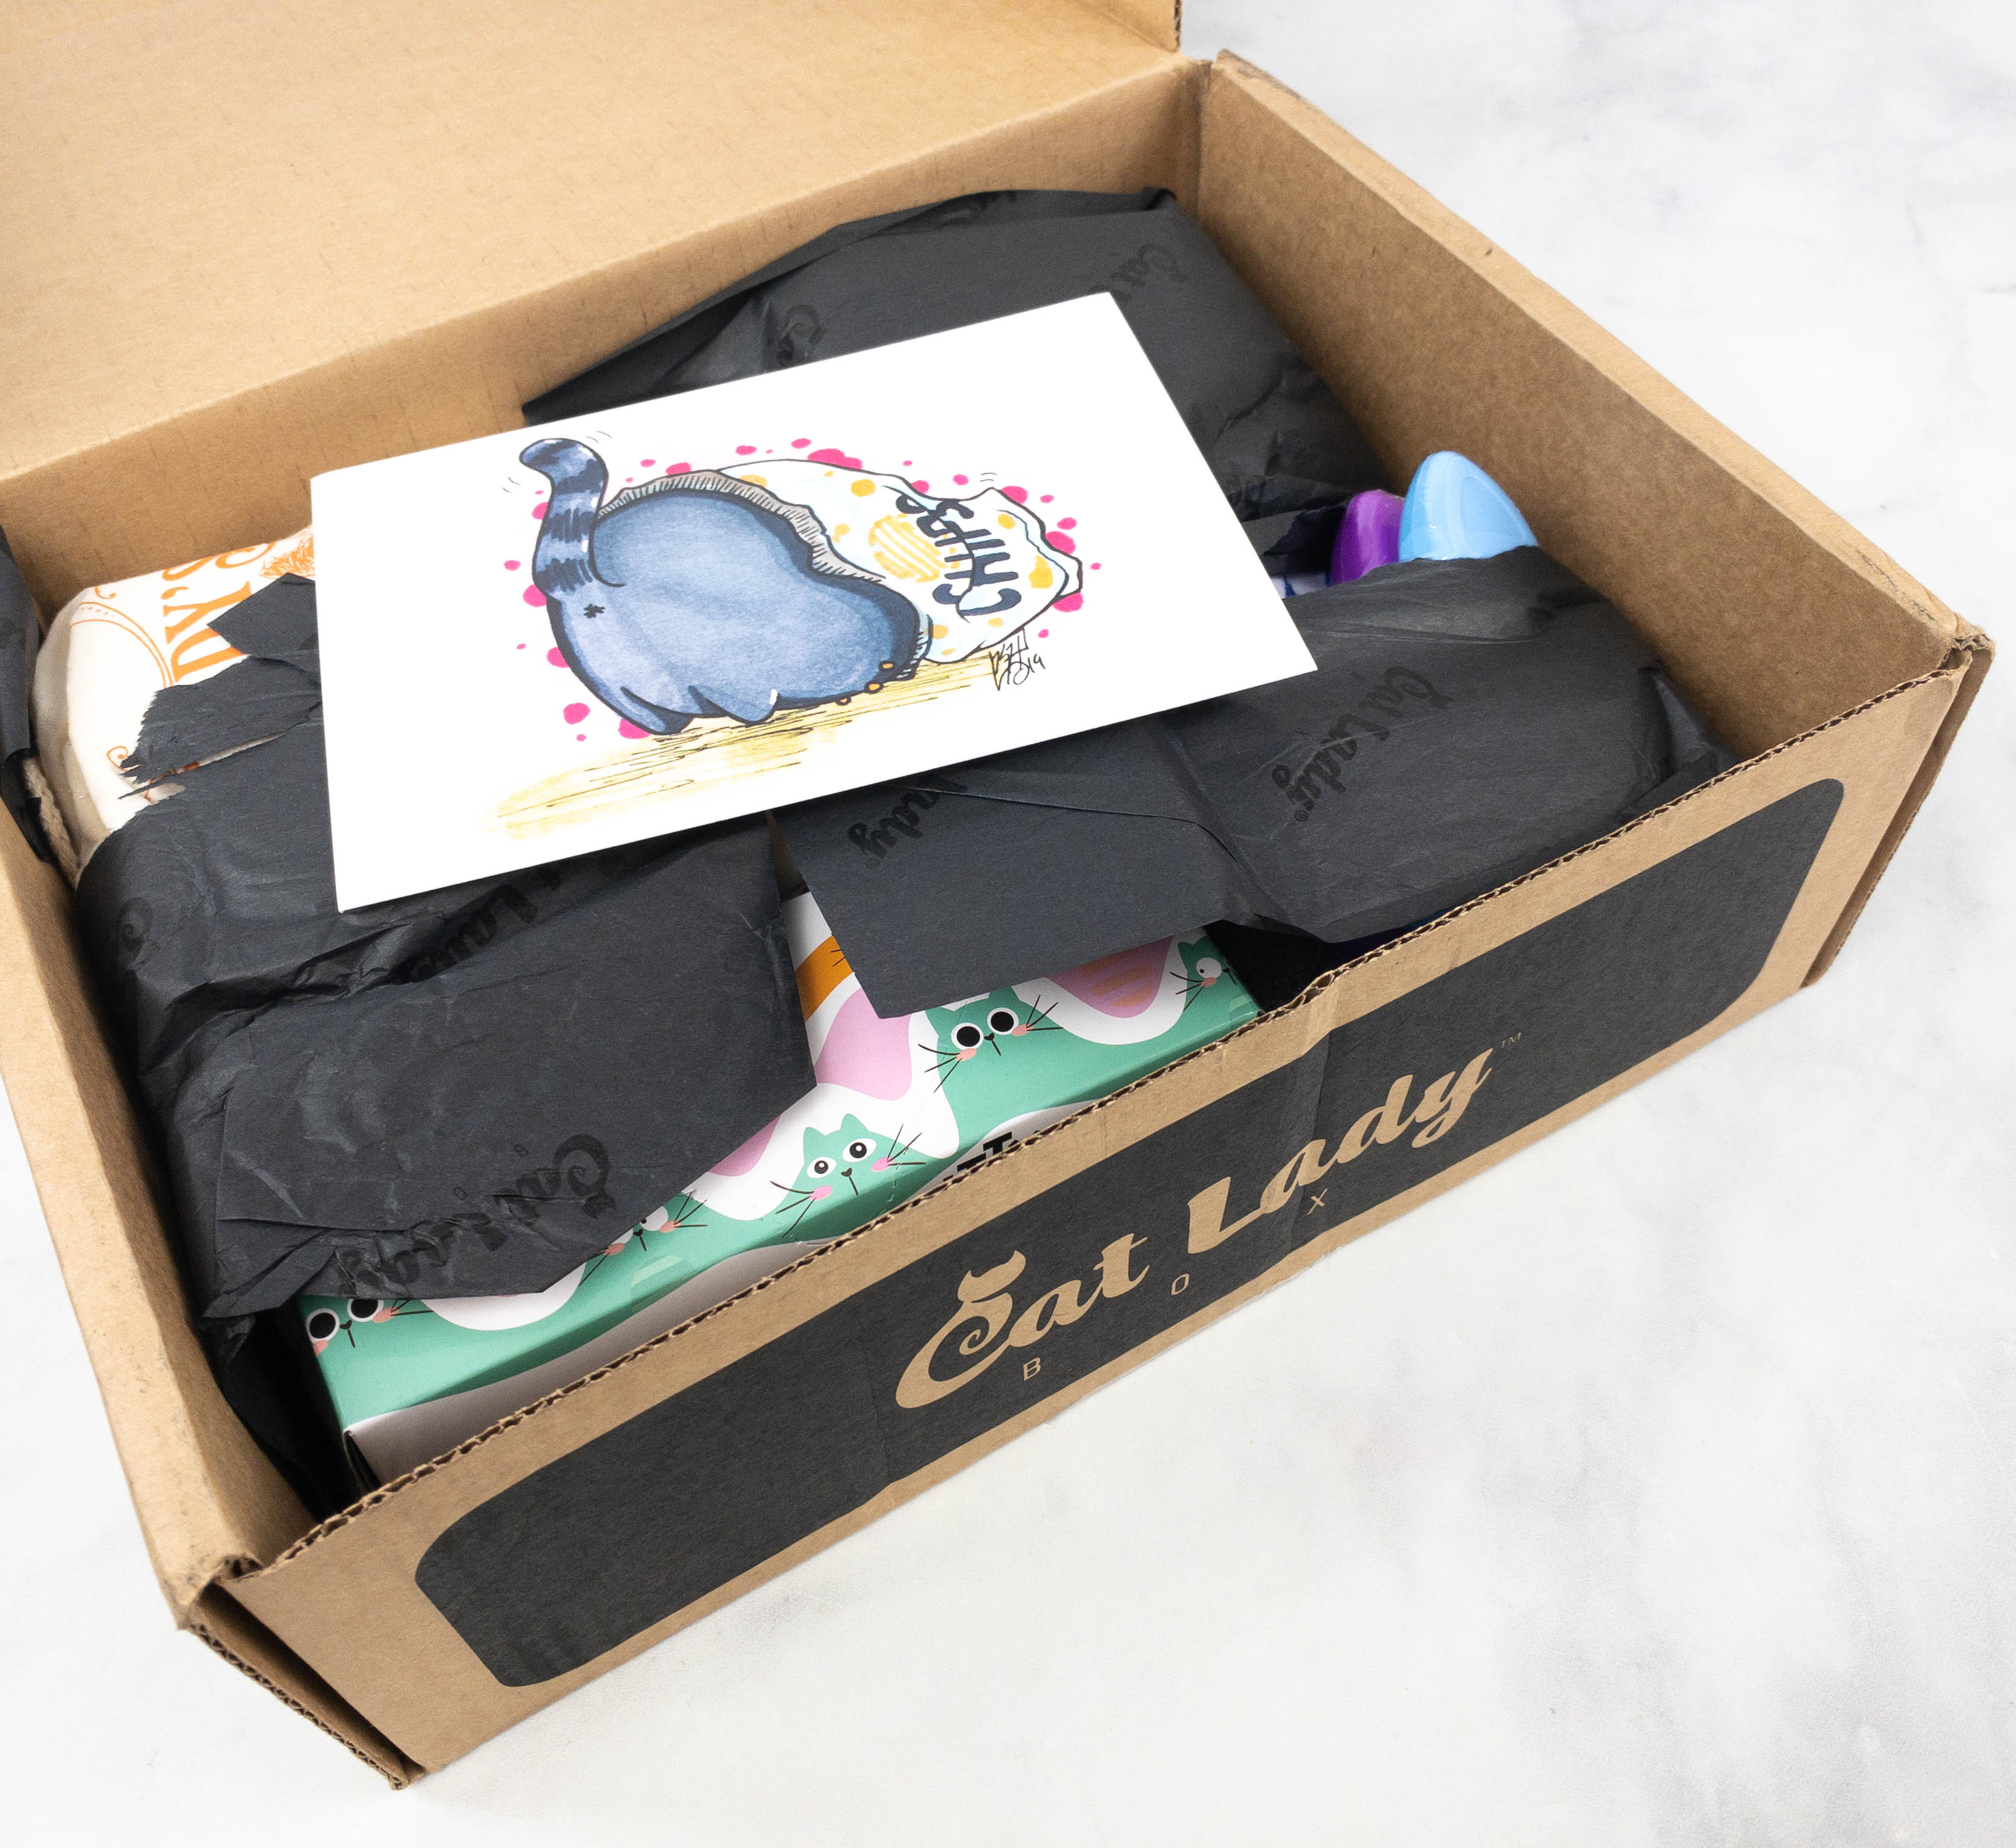 Cat Lady Box August 2021 Subscription Box Review PURRFECT PANTRY BOX